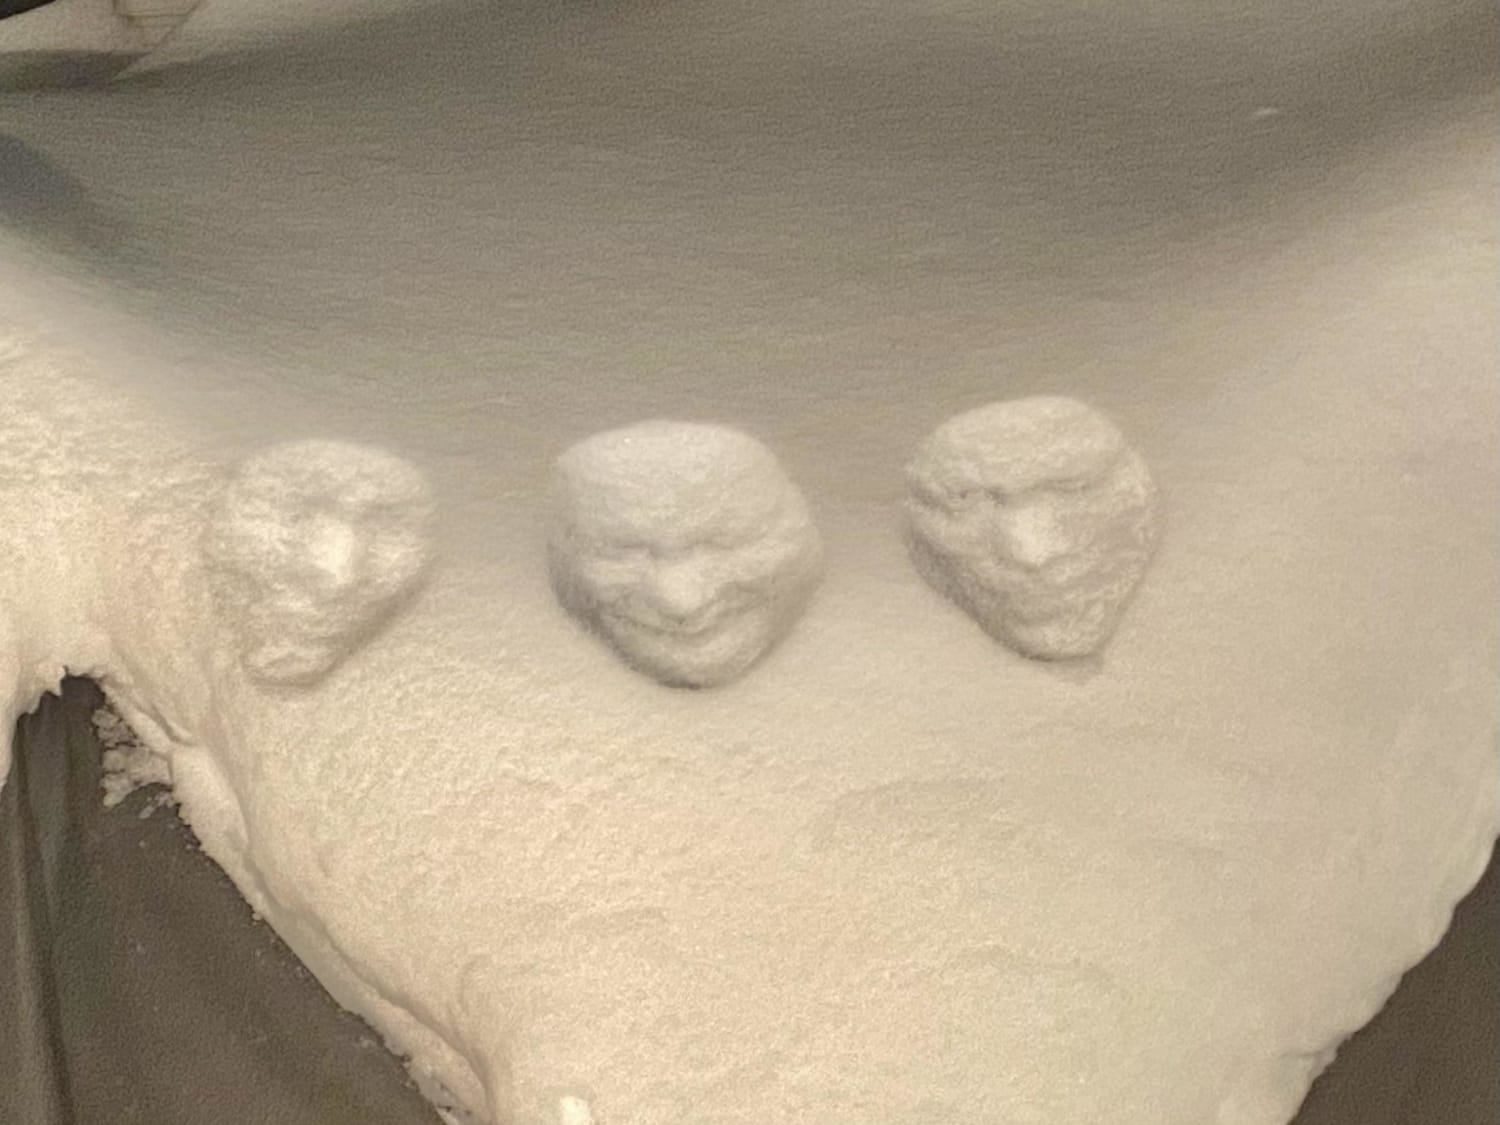 Face prints in the snow looking like they pop out towards you.